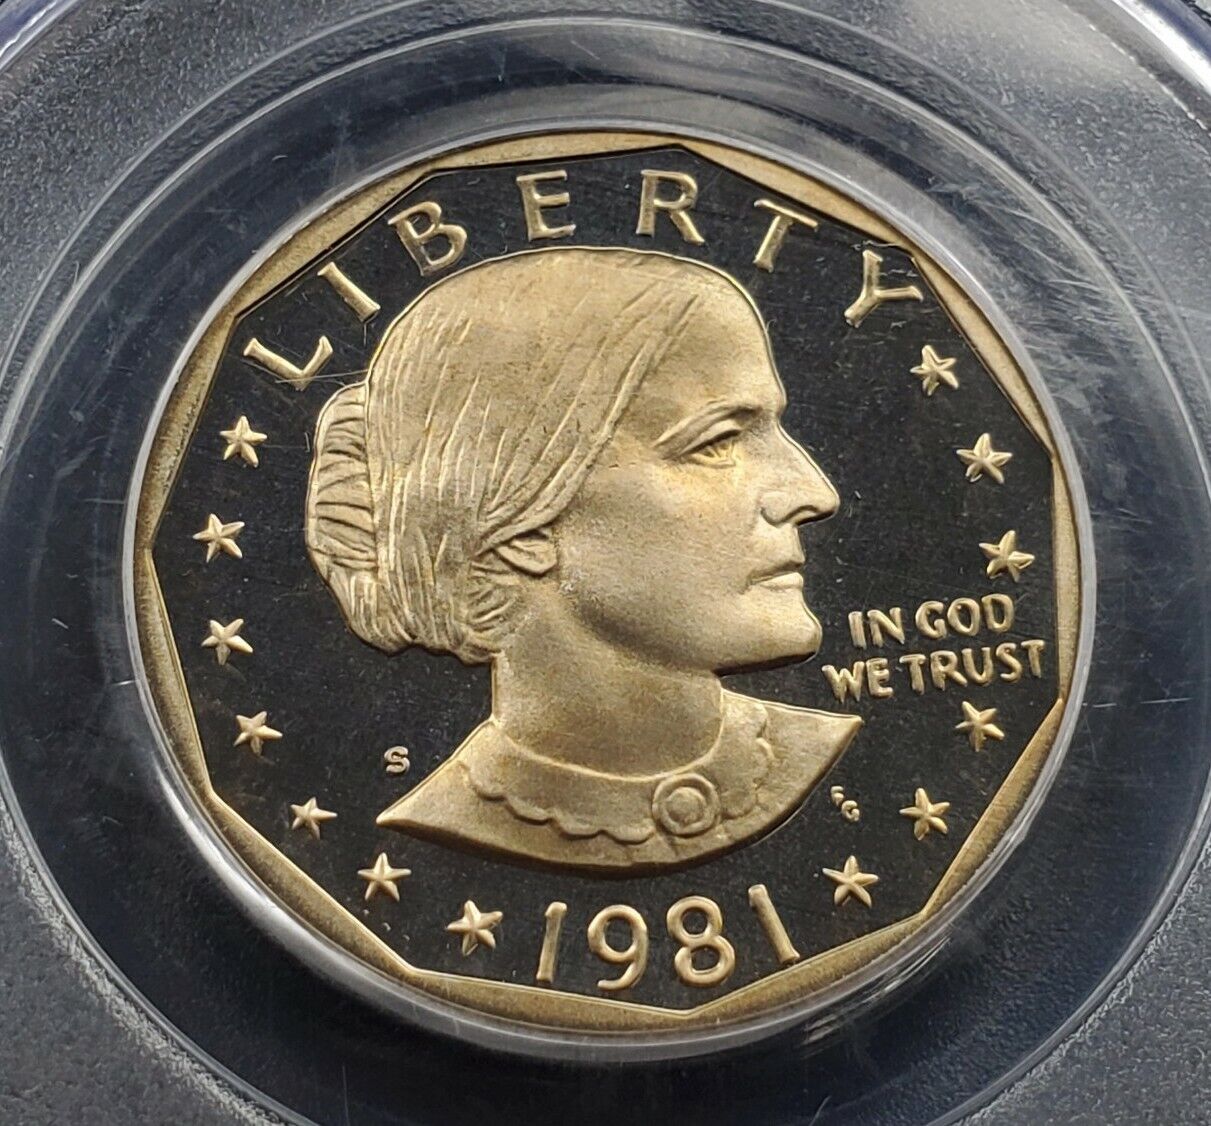 1981 S TYPE 2 SBA $1 Susan B Anthony Small Size Dollar Coin PCGS PR69 DCAM